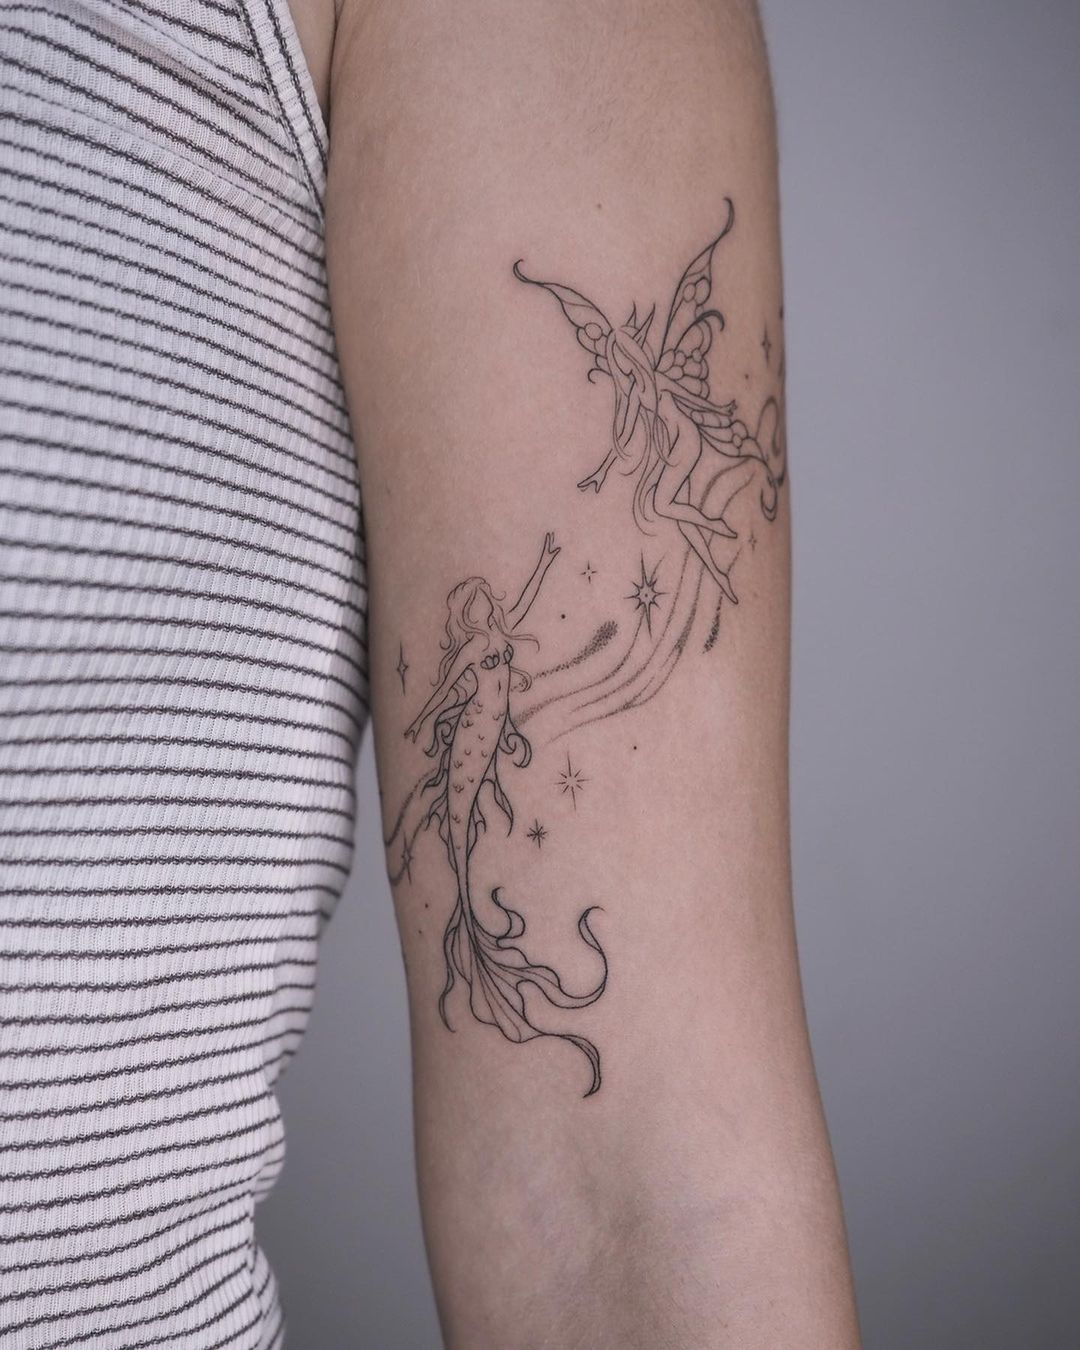 Top 20 mermaid tattoos to make your day!